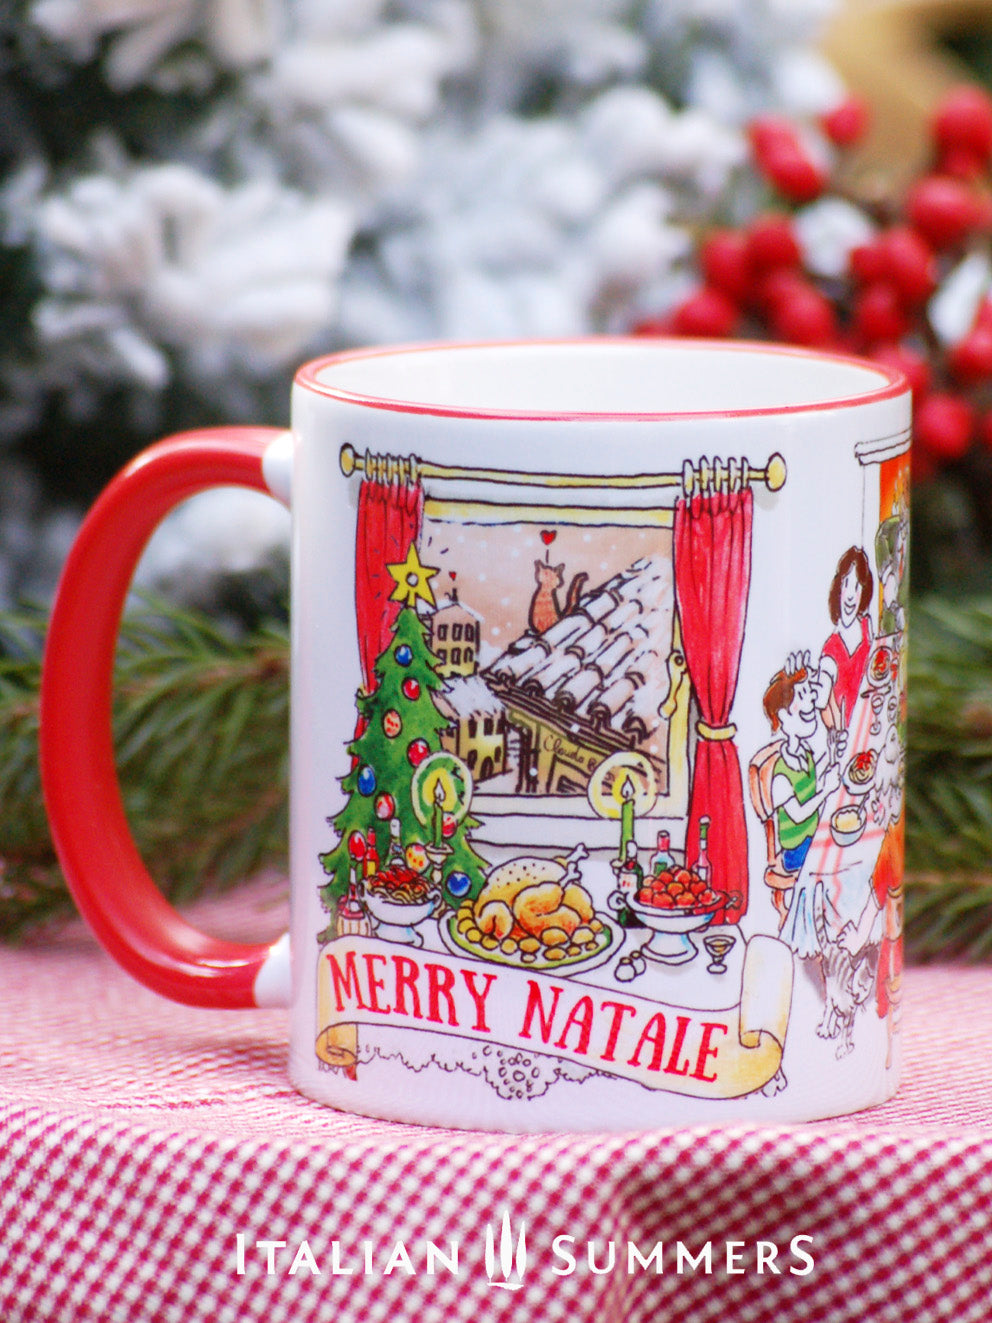 The Natale in Famiglia mug is the perfect companion to capture the festive spirit of this special time of year: a reminder of the joy of family reunions and delicious Italian-style meals. Made by Italian Summers Copyright Italian Summers